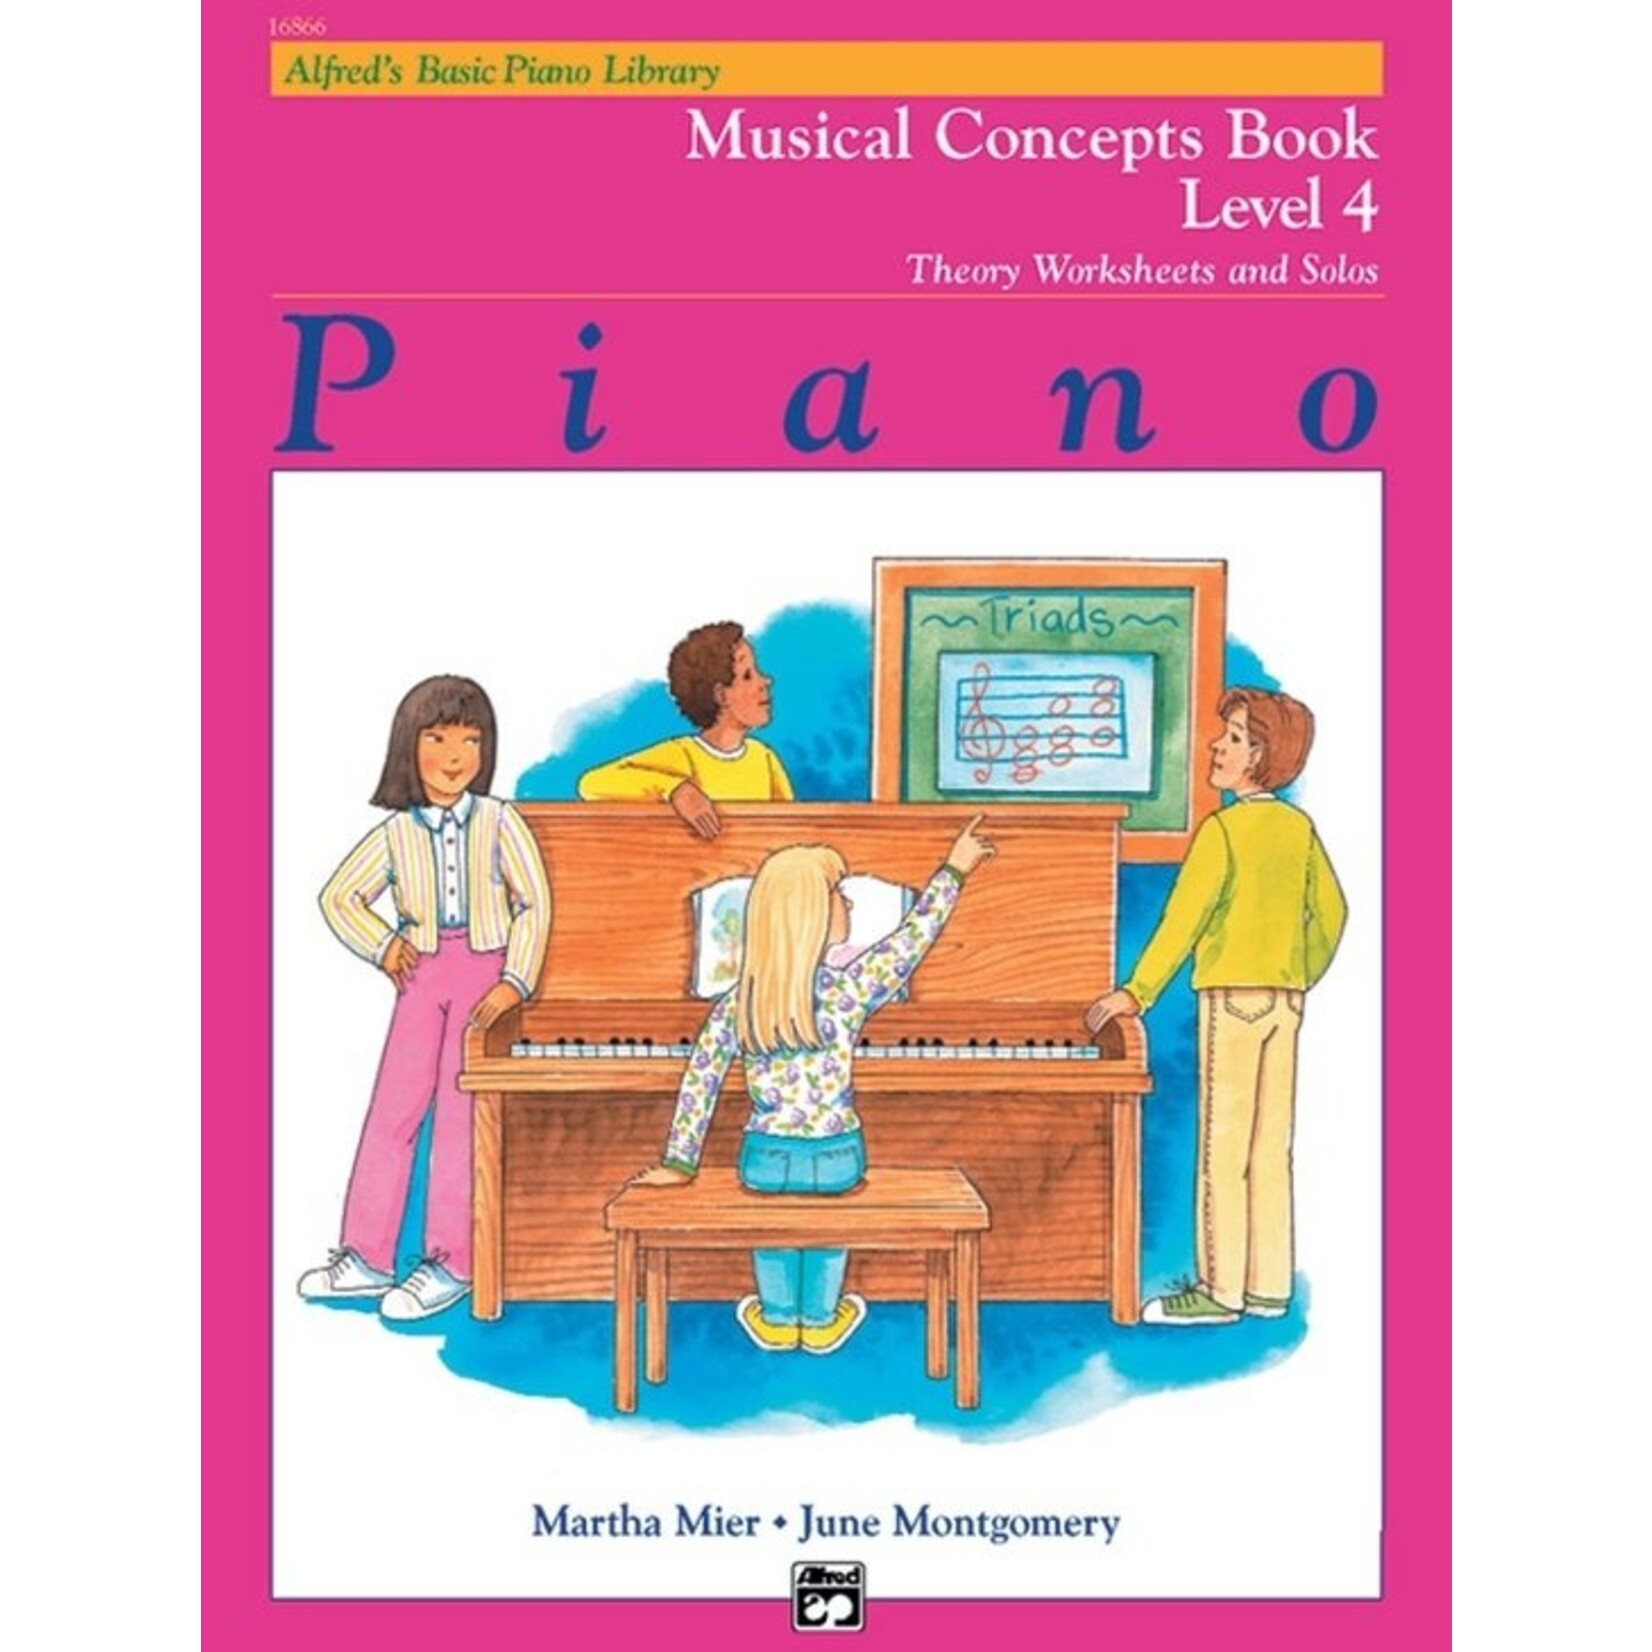 Alfred's Basic Piano Library: Musical Concepts Book 4